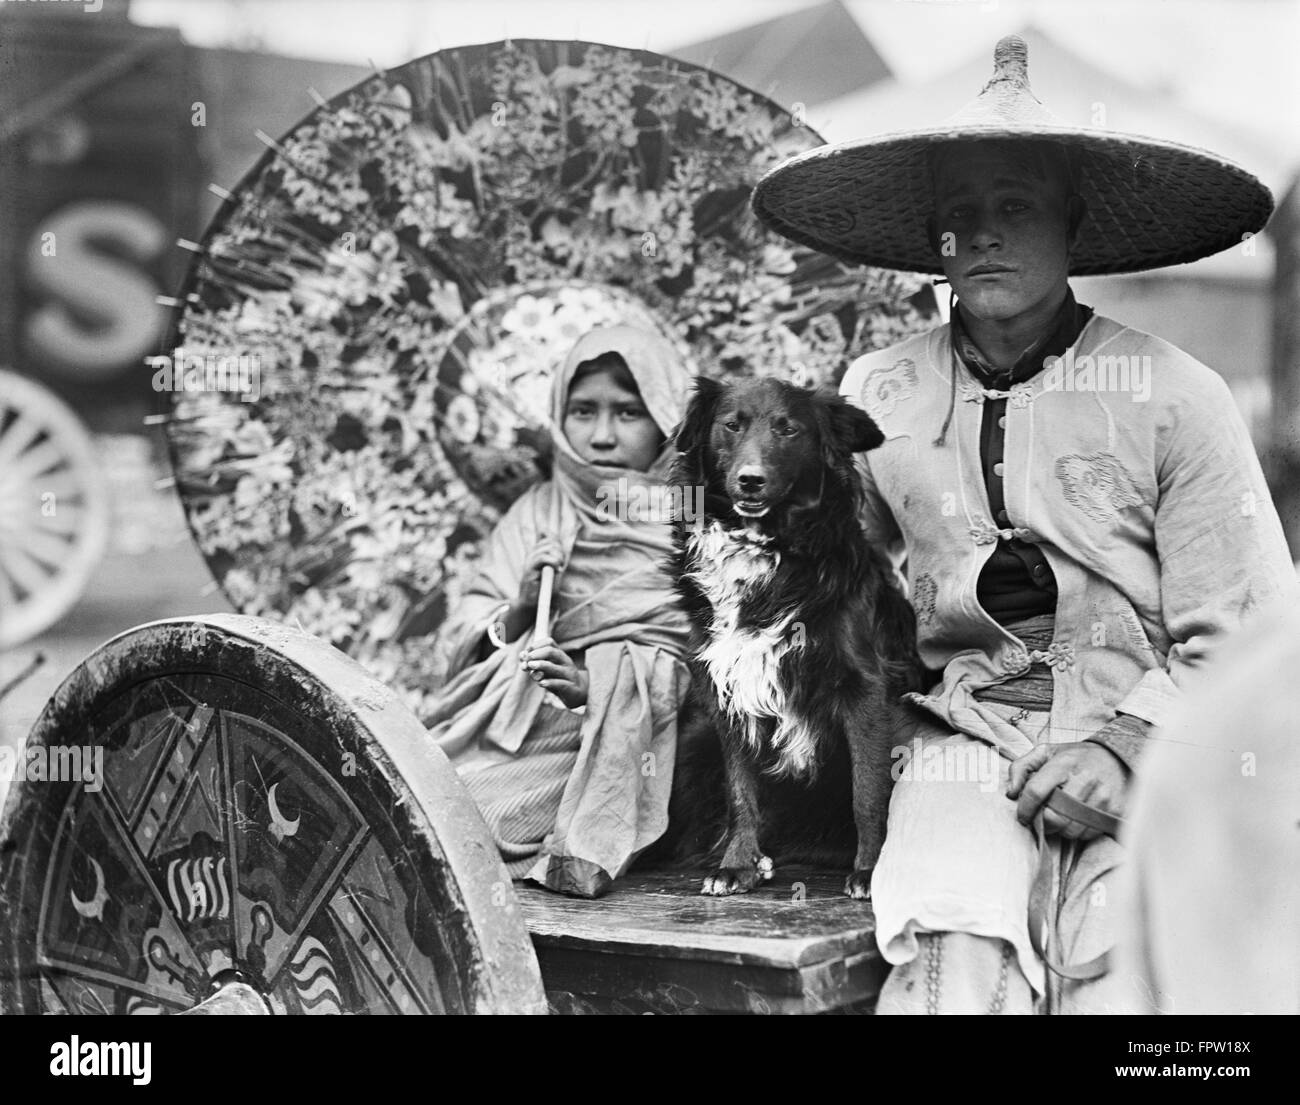 1930s PORTRAIT OF MAN AND GIRL CIRCUS PERFORMERS WITH DOG WEARING TRADITIONAL ASIAN CLOTHING GIRL HOLDING DECORATIVE UMBRELLA Stock Photo